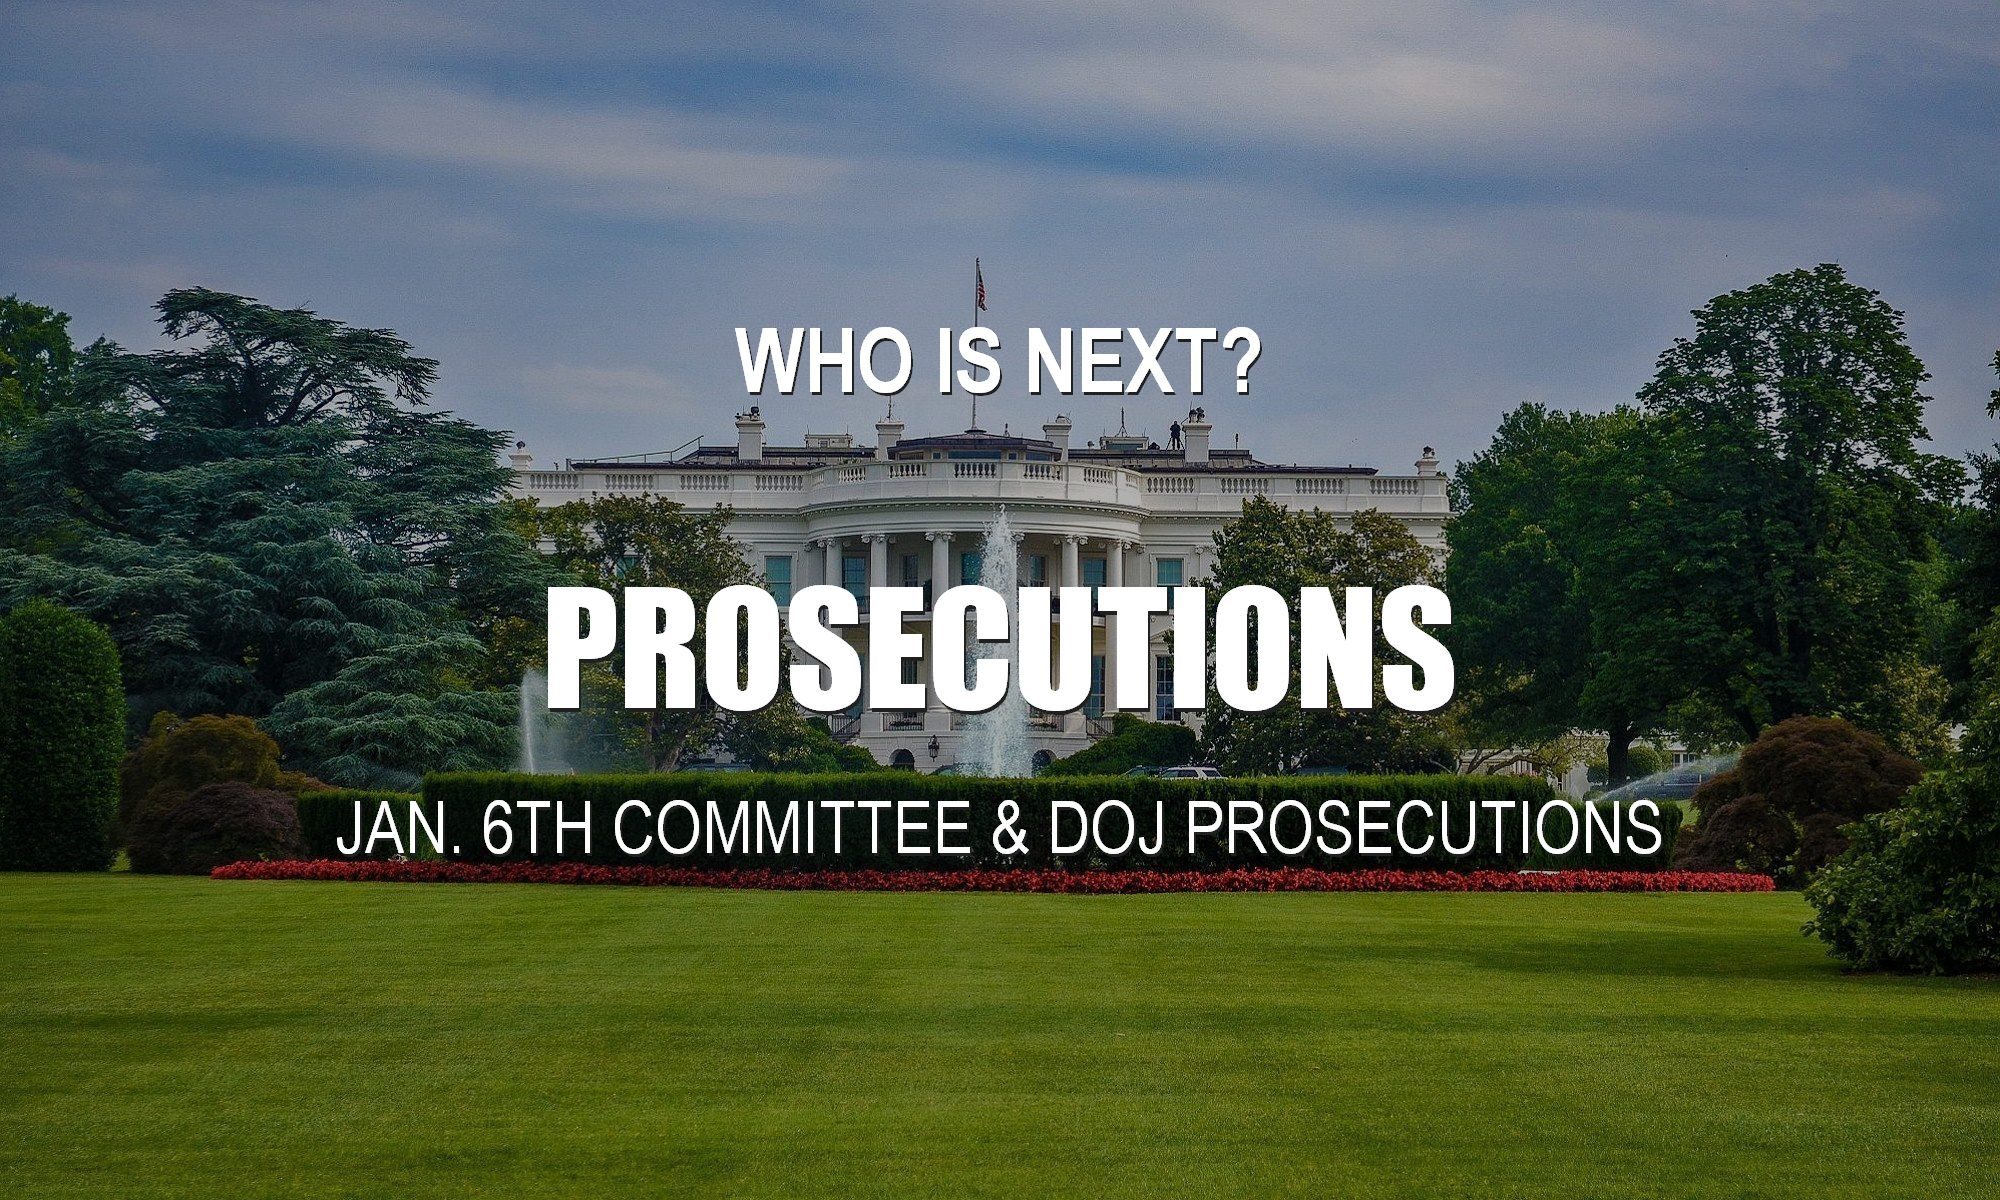 Who Will Be Prosecuted and indicted Next By the January 6th Committee & the Department of Justice? Mark Meadows, Jeffrey Clark & Trump's Enablers